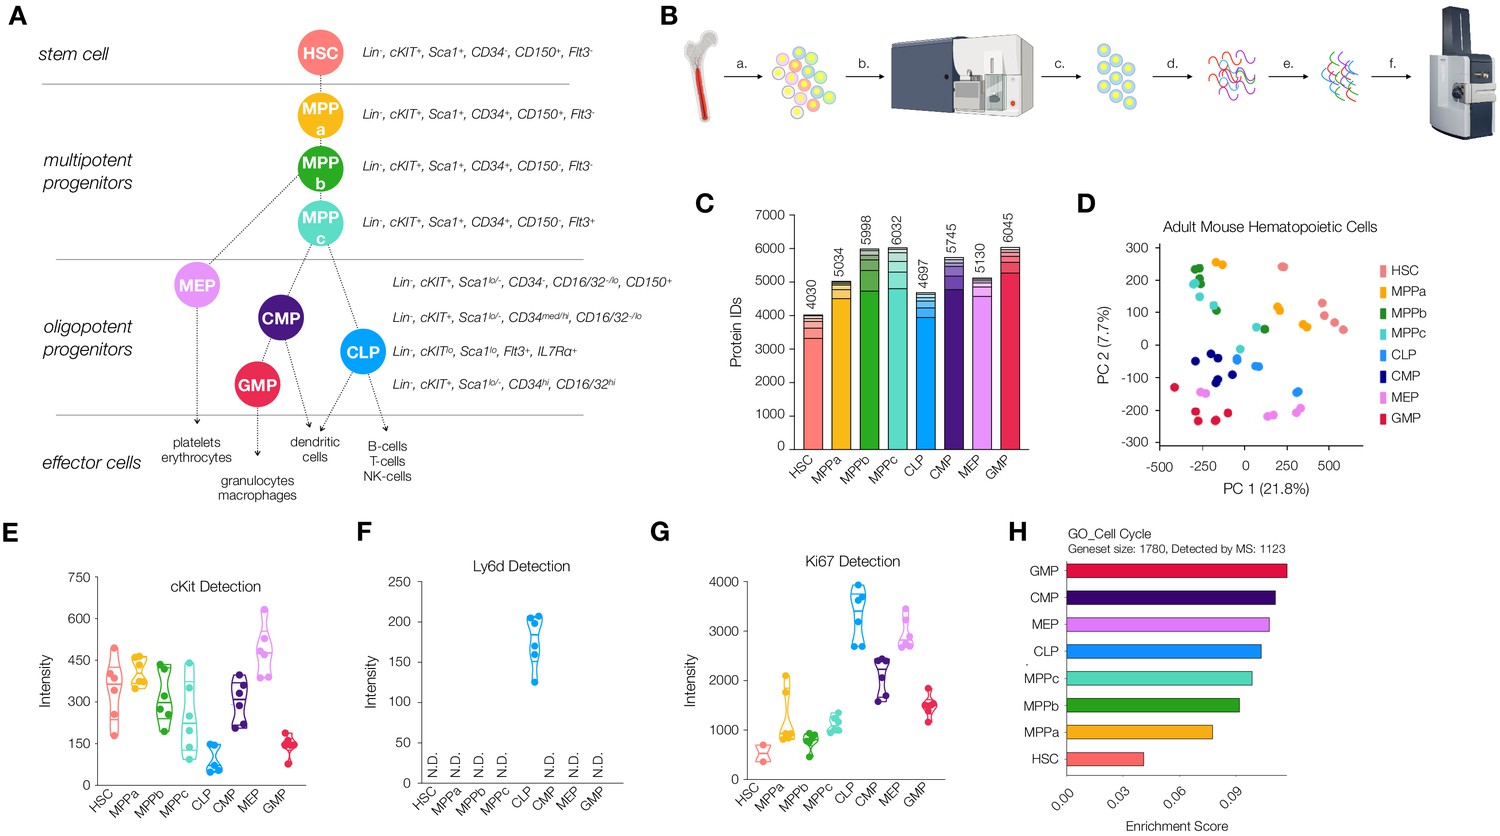 Proteomic analysis of young and old mouse hematopoietic stem cells